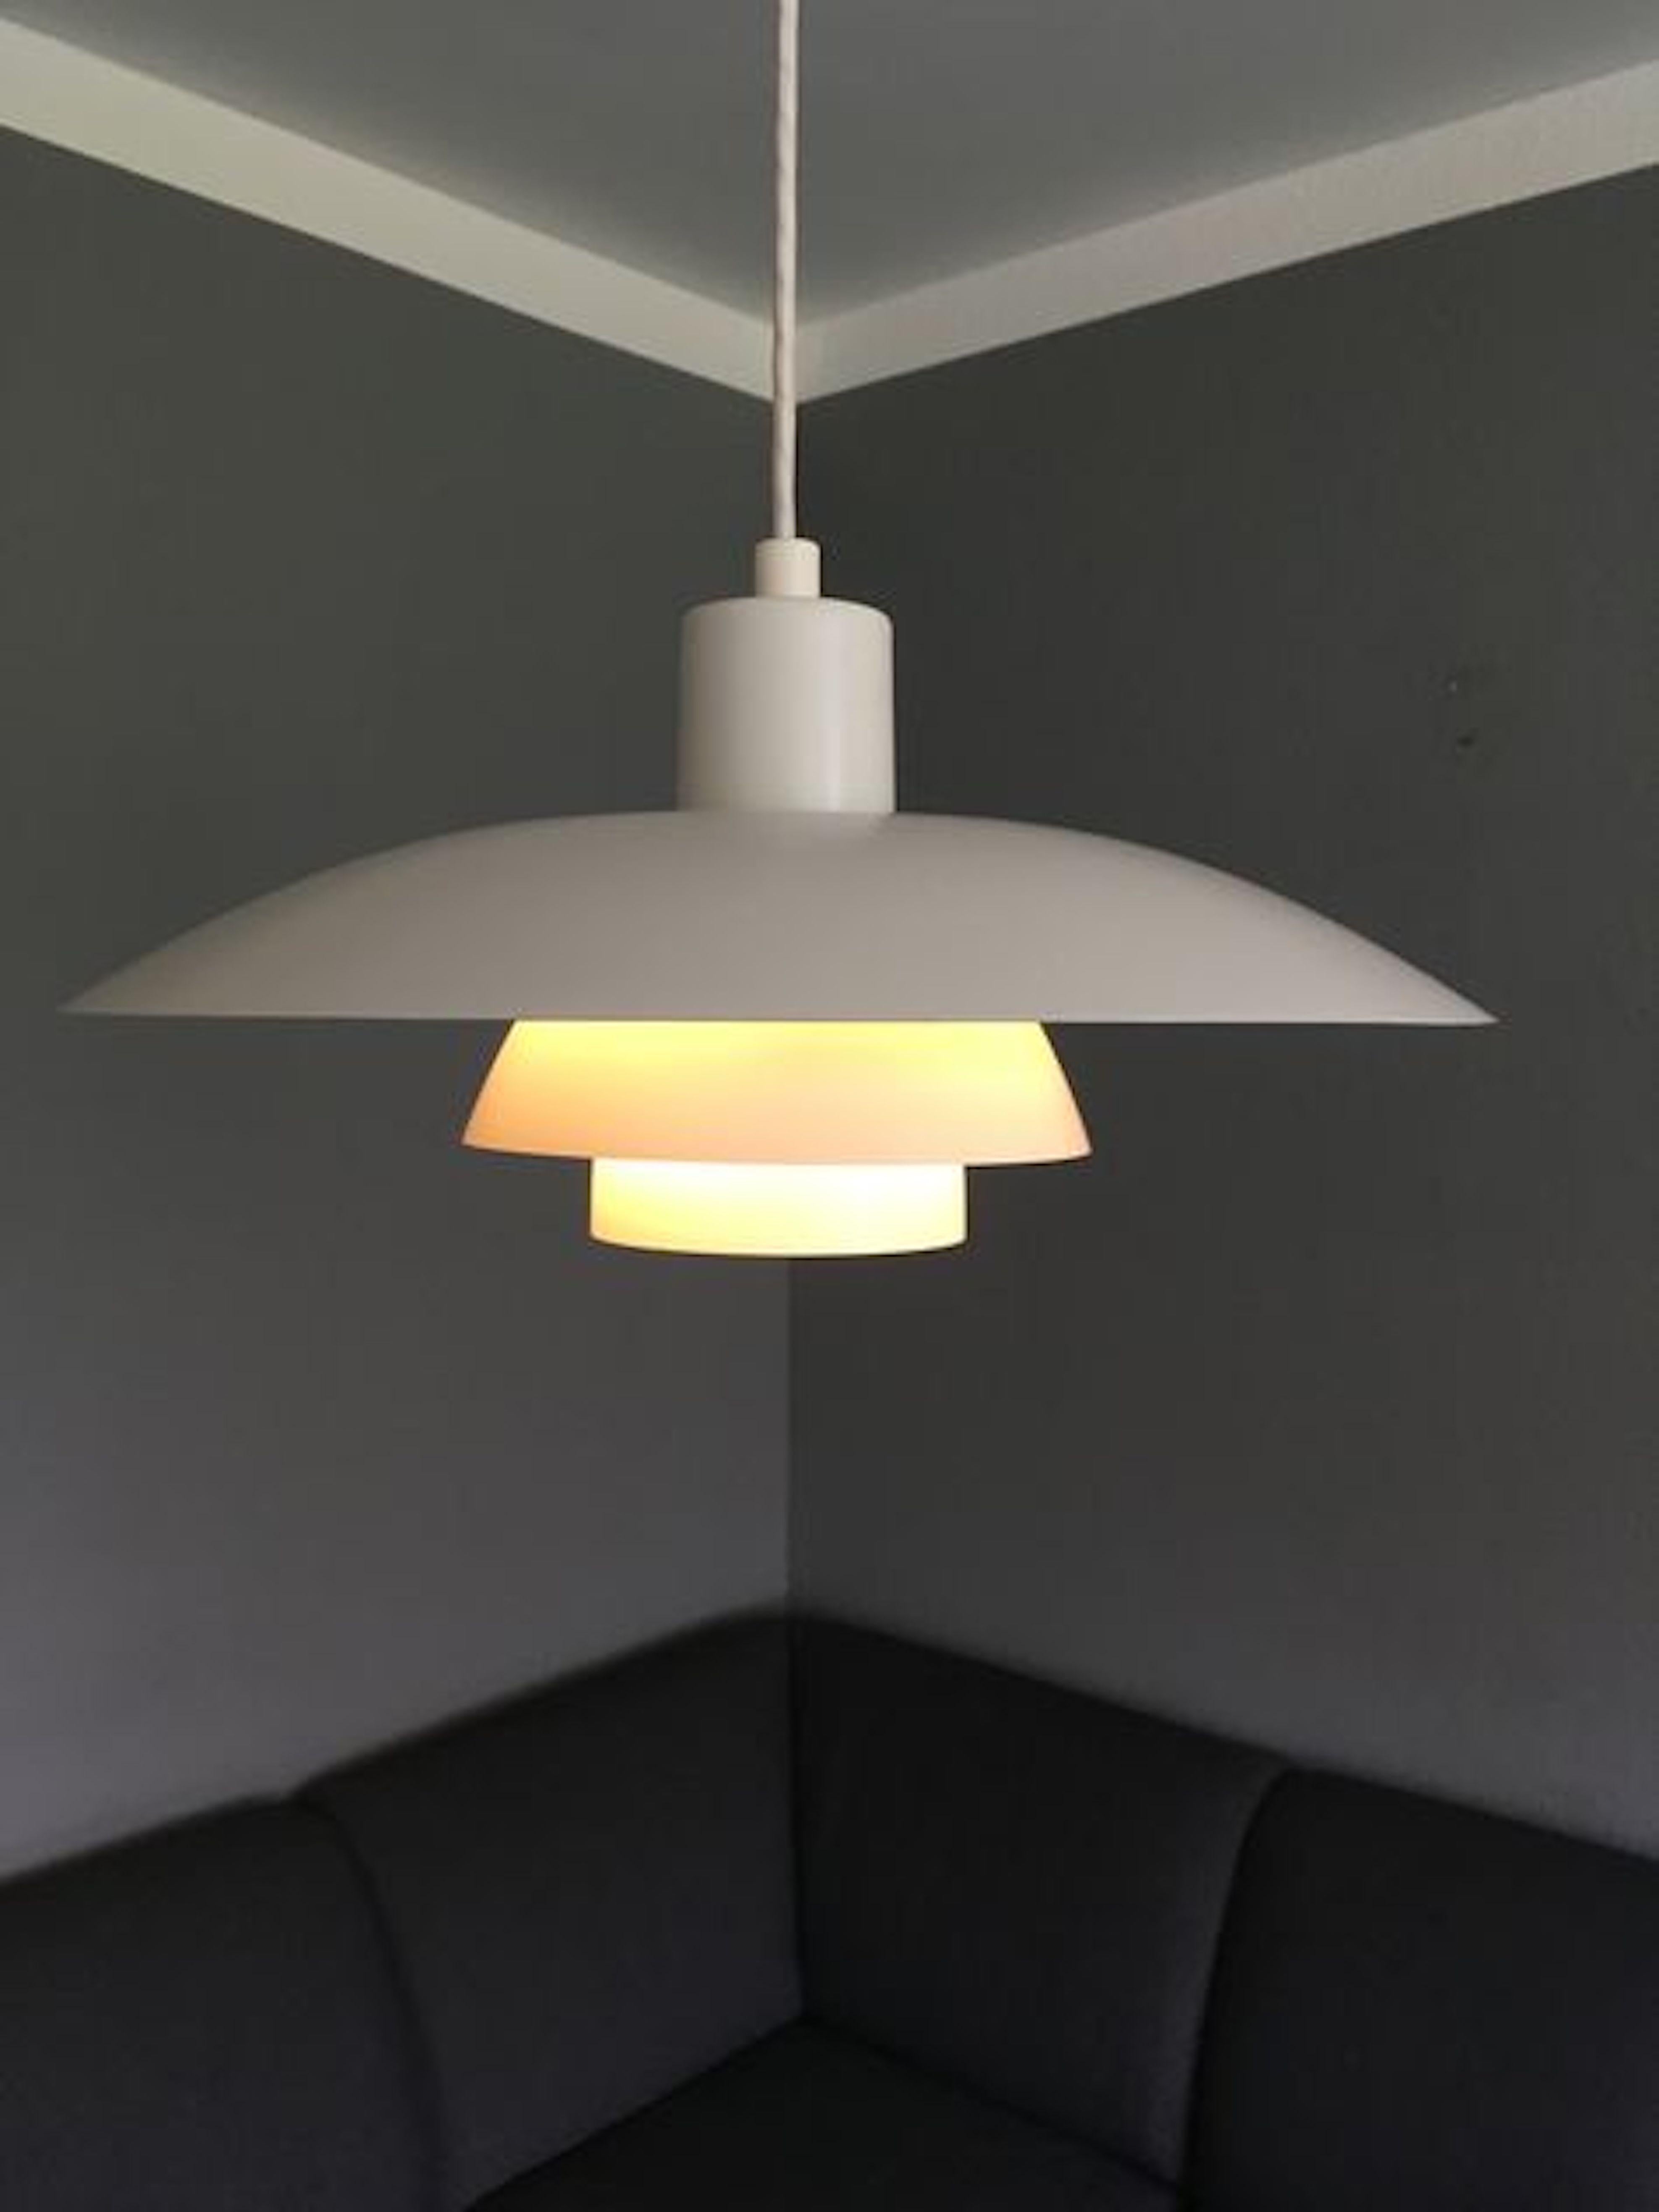 Produced in Denmark, circa 1970
Designed by Poul Henningsen - PH
Manufactured by Louis Poulsen
The lamp is designed so that you have a maximum diffusion of light and minimal glare
Porcelain fitting - up to 100 watts E27 lightbulb
Old